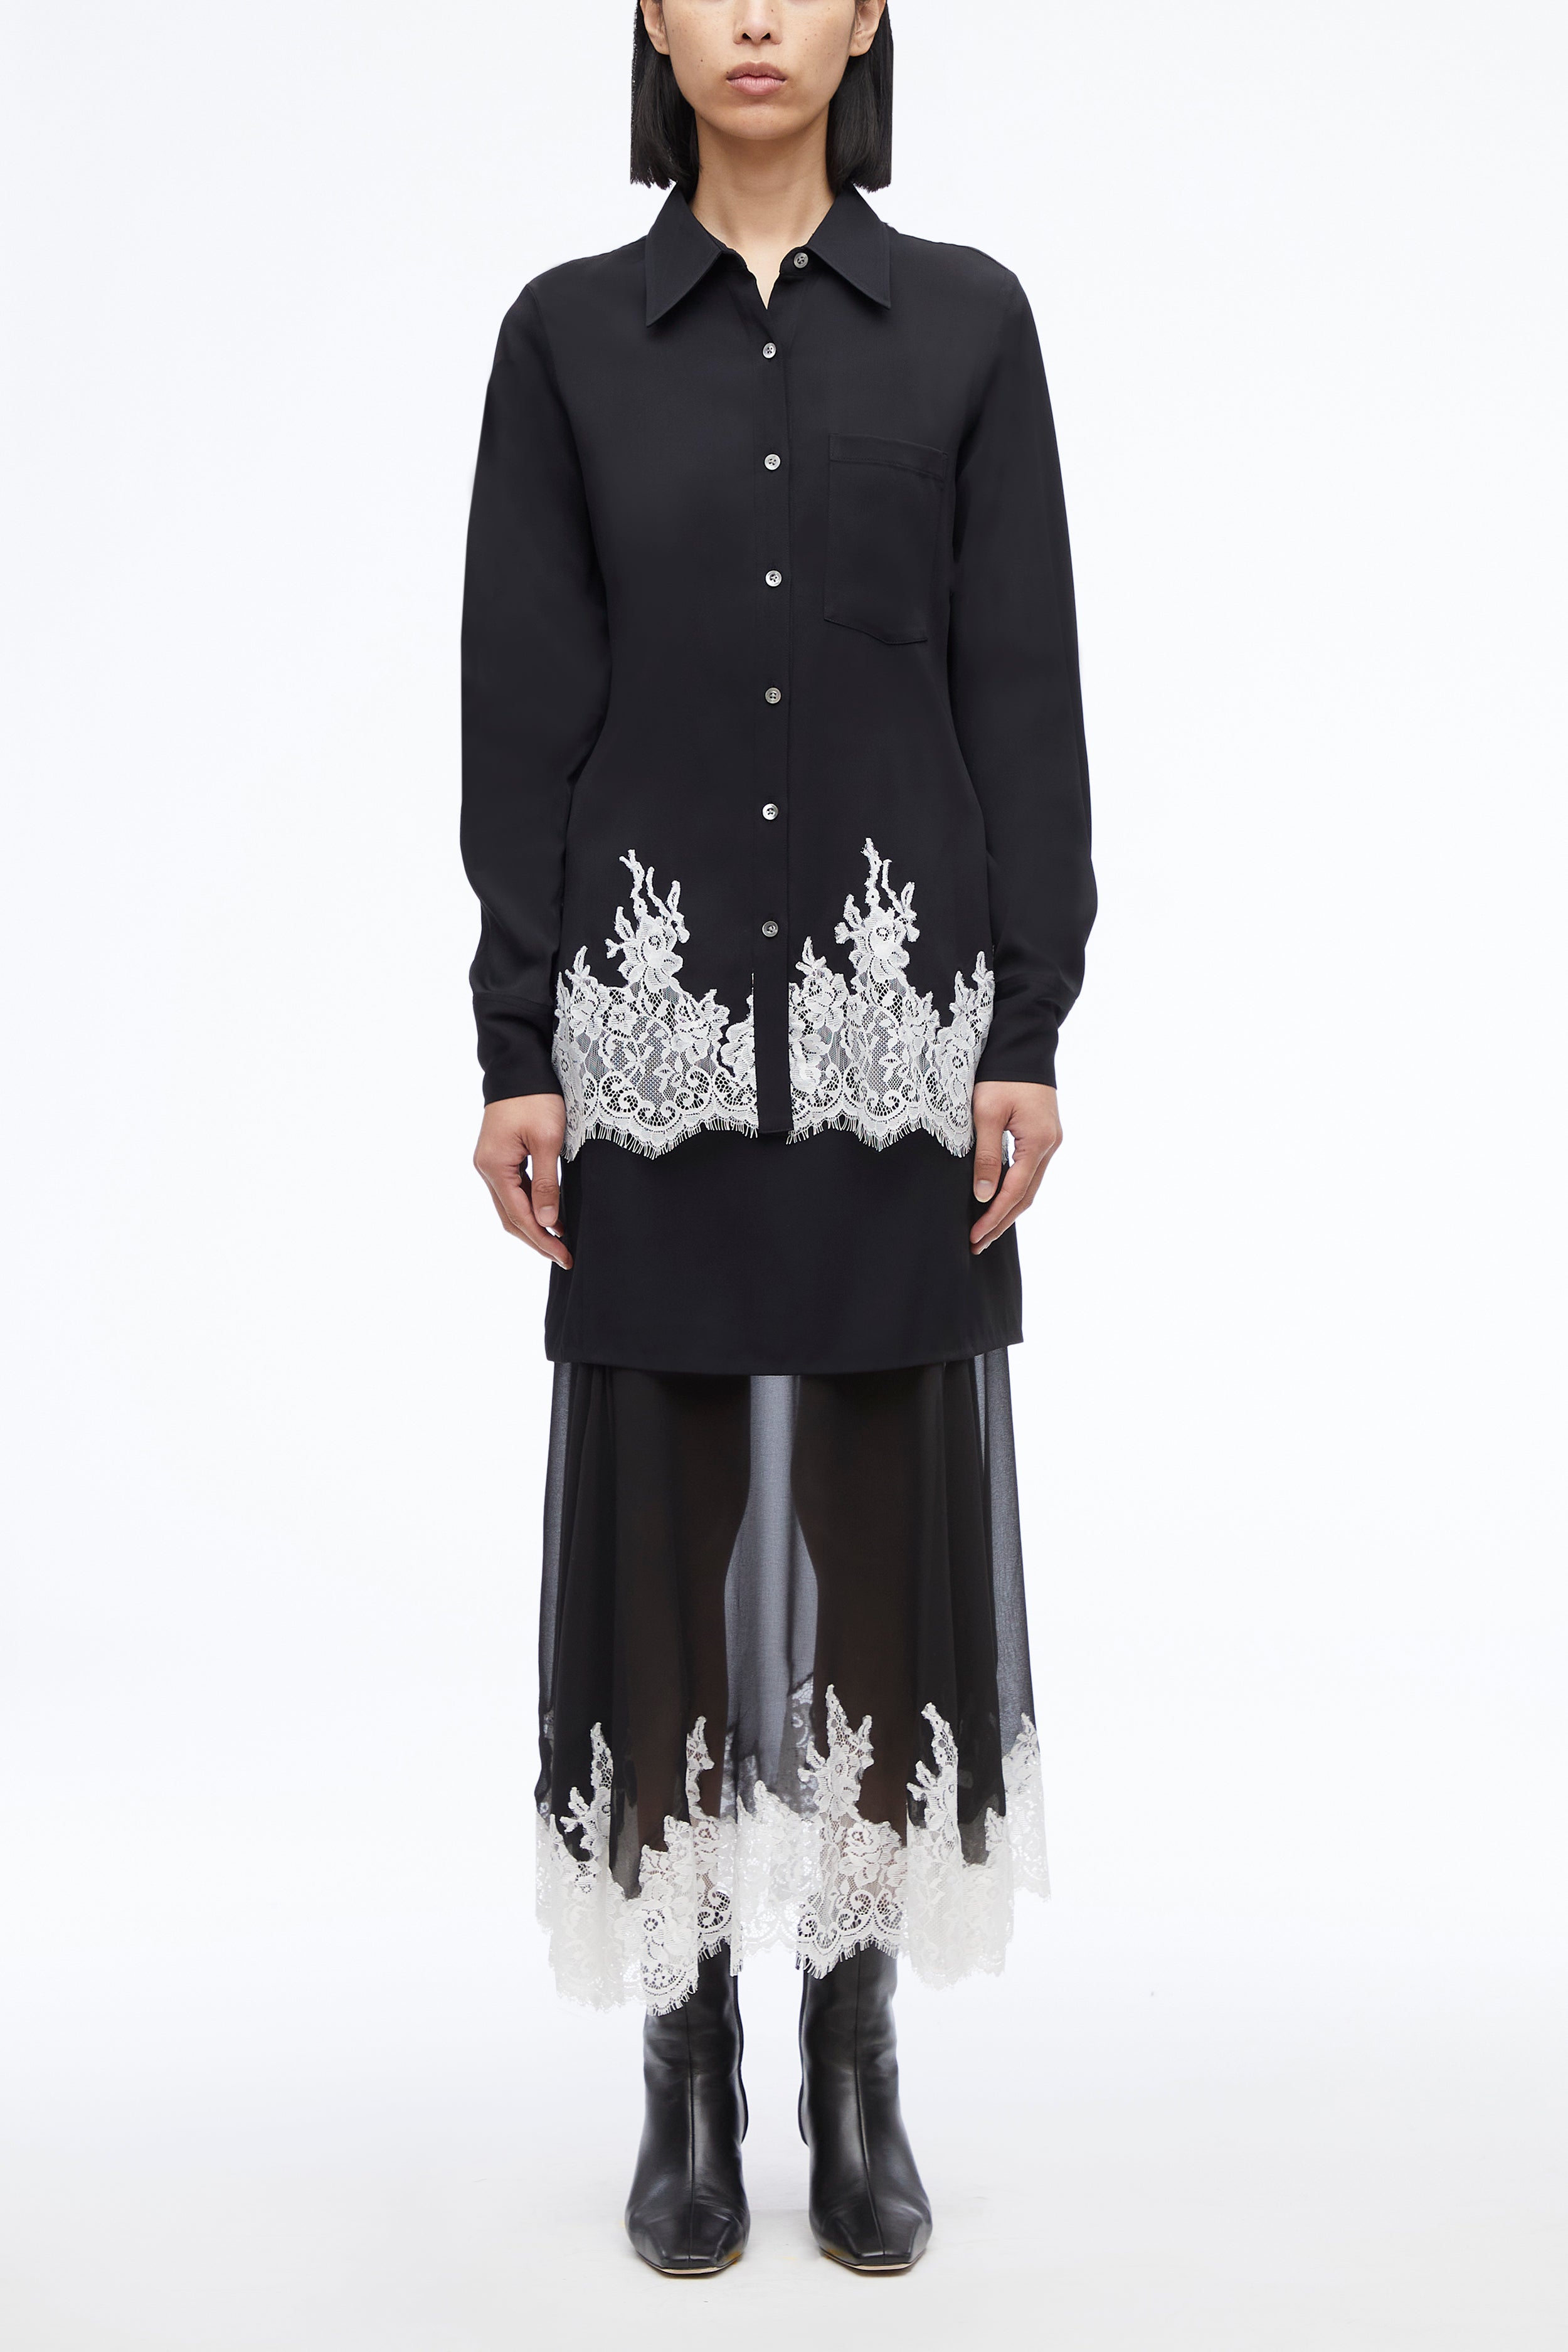 Women's Ready-To-Wear | 3.1 Phillip Lim – Page 7